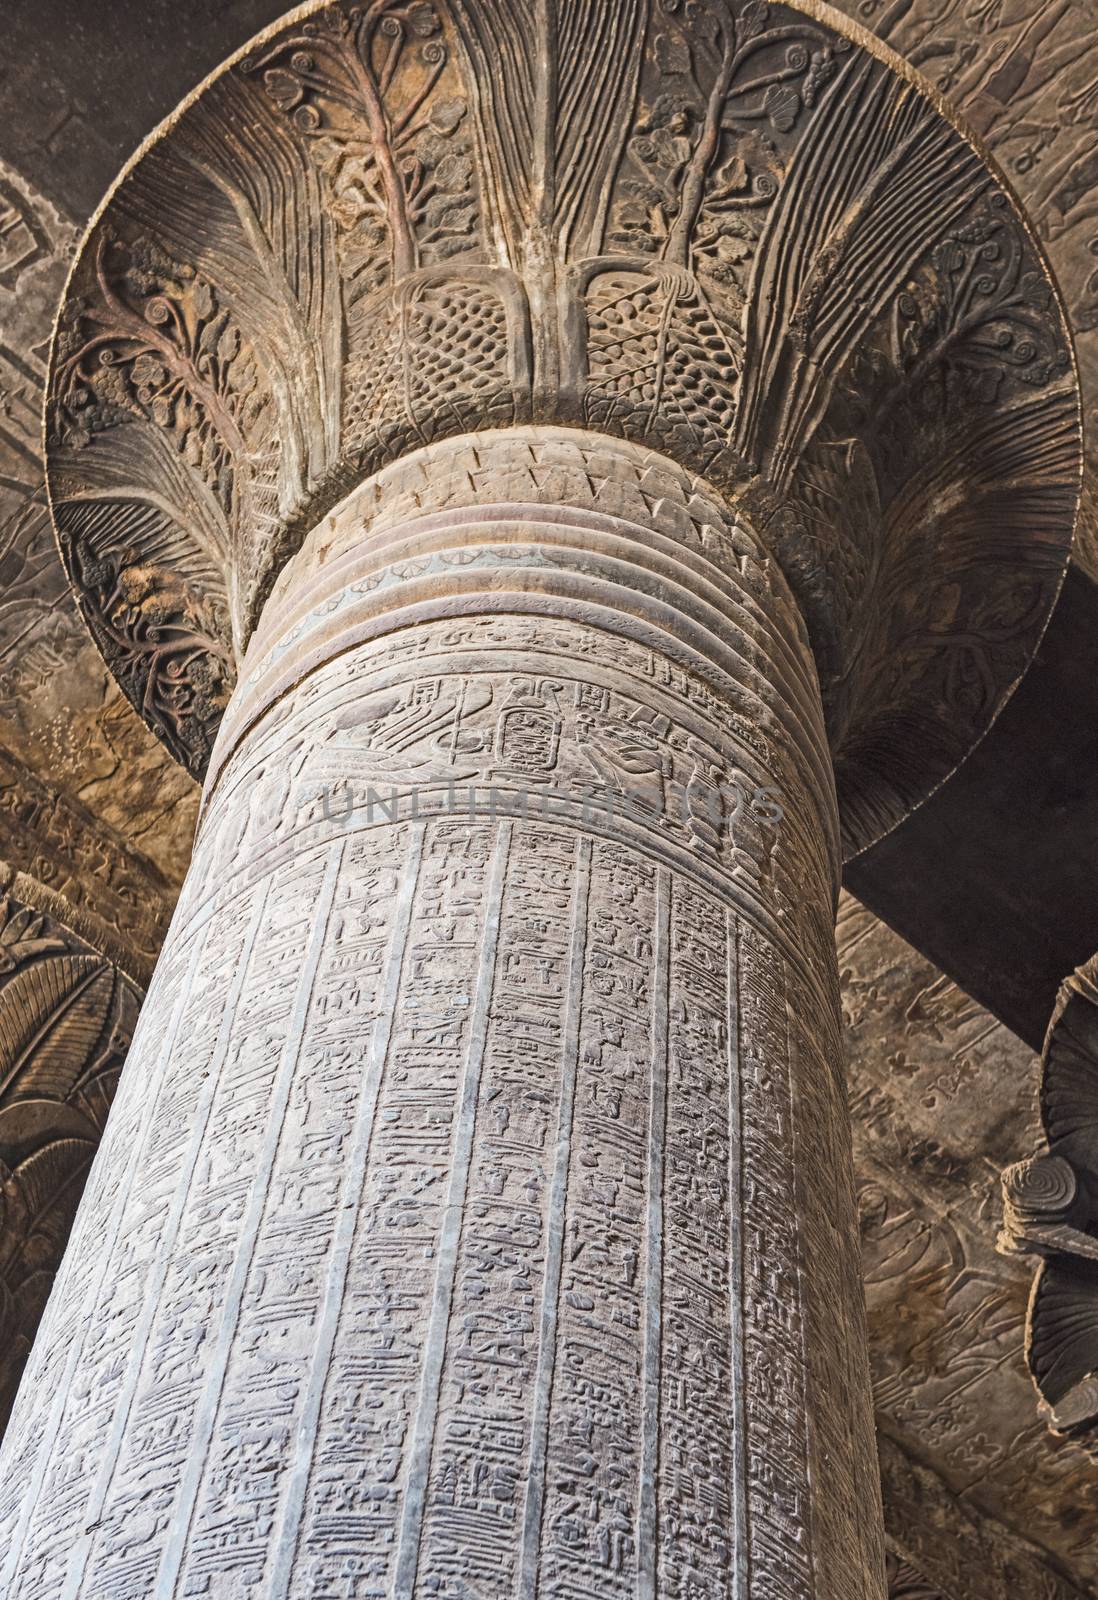 Column in the ancient egyptian temple of Khnum at Esna with hieroglyphic carvings and ornate tulip top